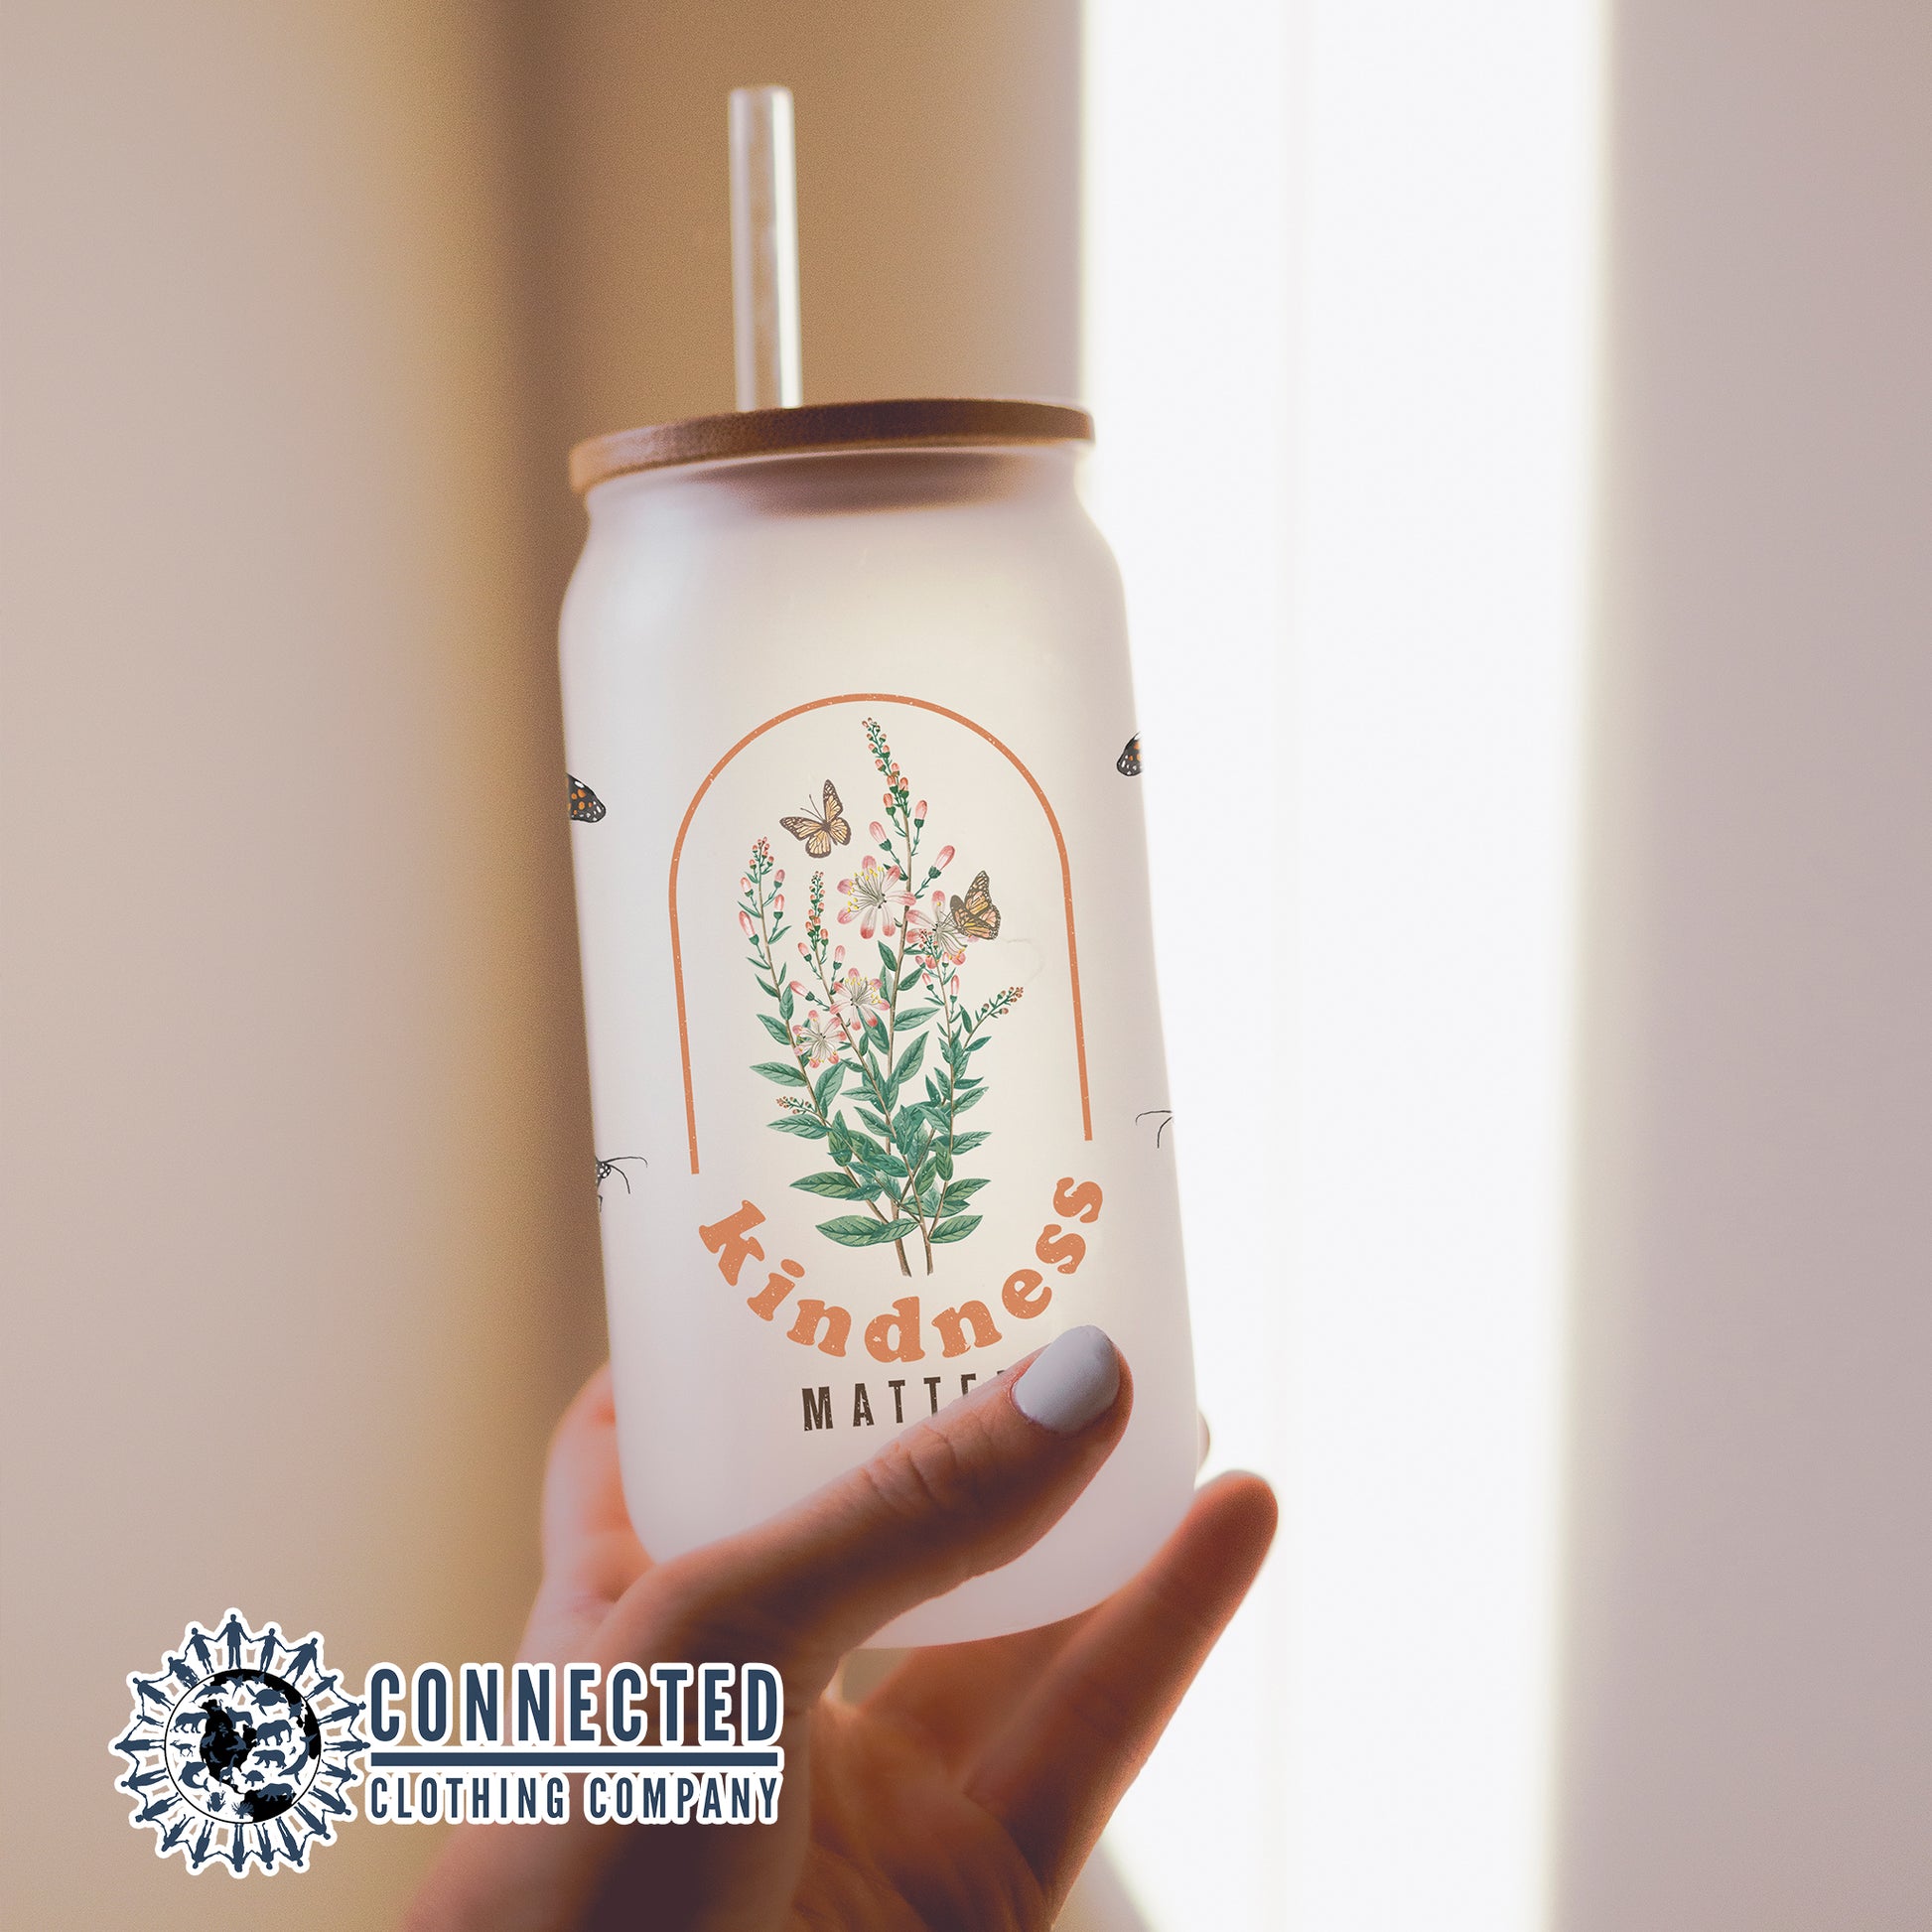 Kindness Matters Monarch Glass Can - Connected Clothing Company - 10% of proceeds donated to save the monarch butterflies